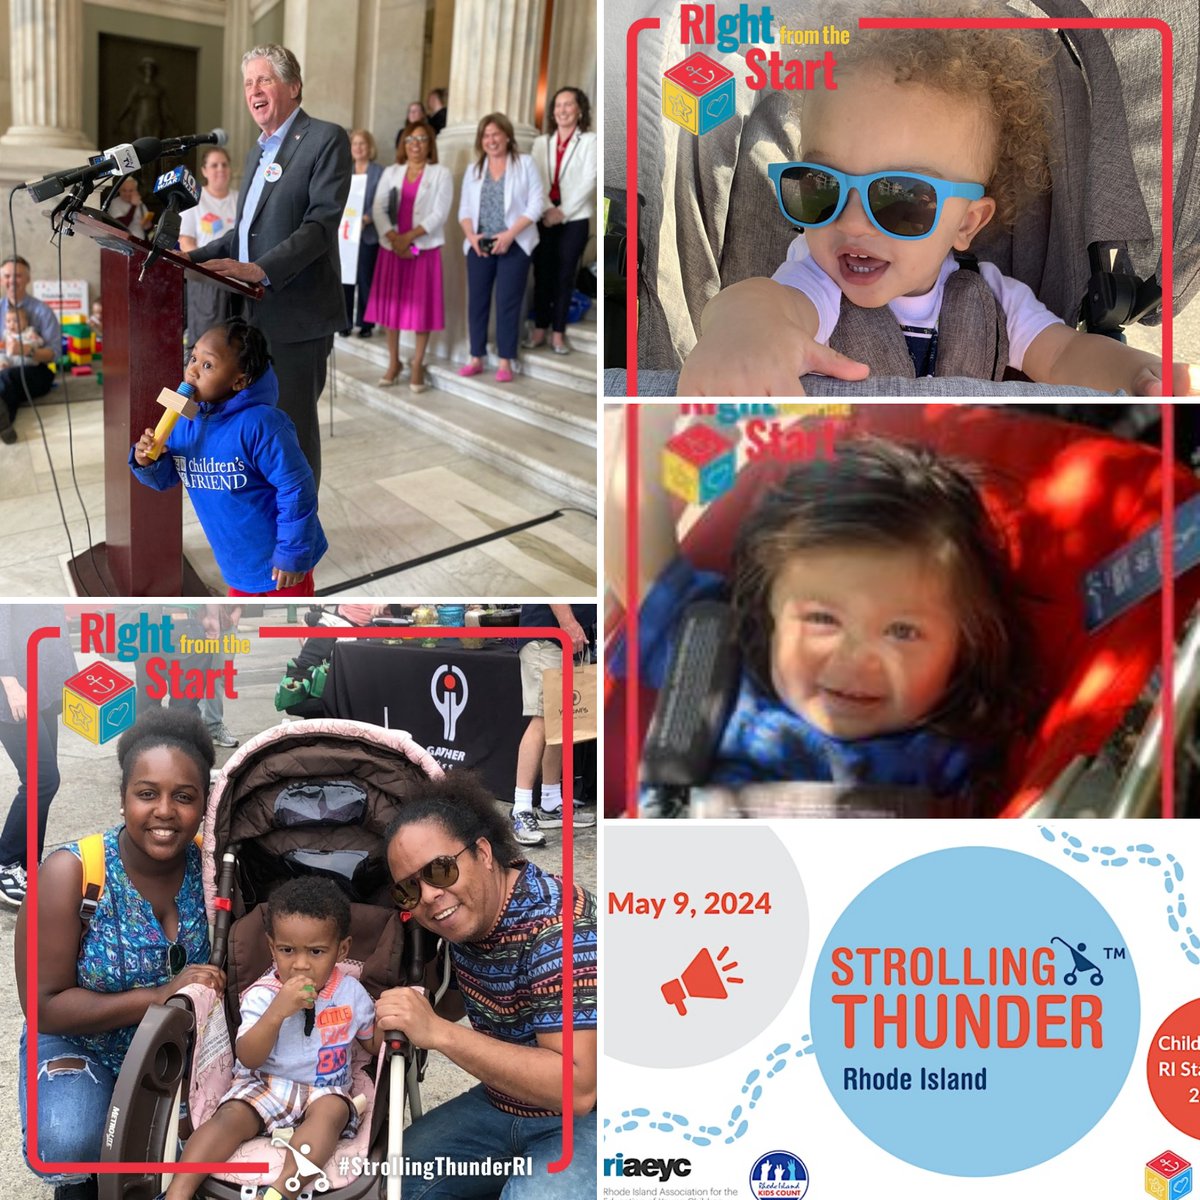 Lookout @GovDanMcKee @RIHouseofReps @RISenate! An army of cute kids and parents are getting ready to 'stroll' to the State House May 9th to advocate for legislation and investments to ensure ALL RI families have what they need to thrive. #StrollingThunder is ready to roll!